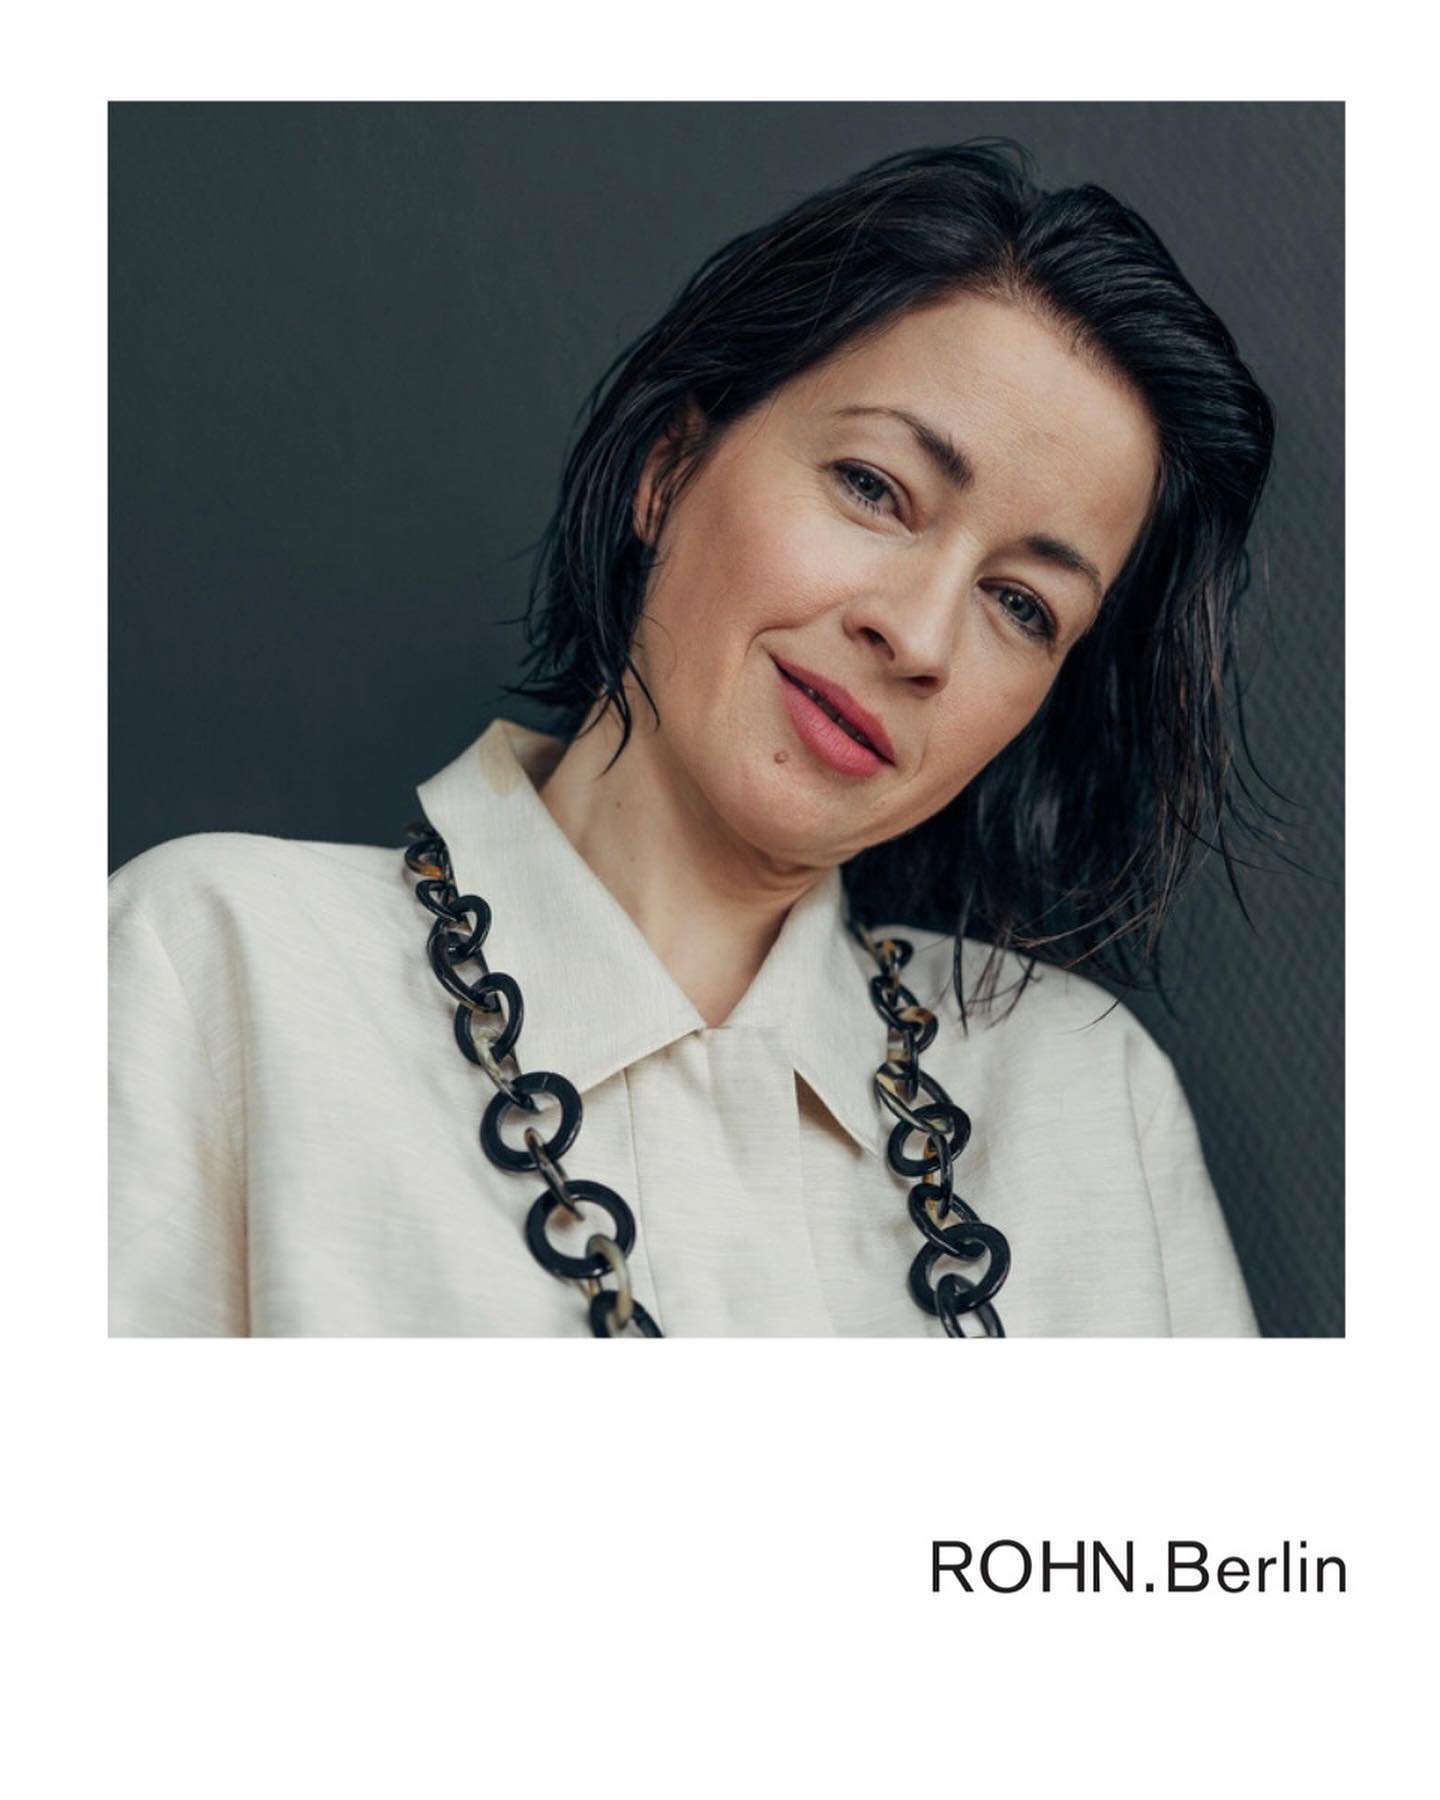 &hellip; in these hot summer days - you are very happy cause your haircut works in every angle with every styling

#rohnberlin
#rohnberlinstudio
#berlinhairdresser
#beautifulhairexpert
#haircut
#haircolor#straighthair
#naturalhair 
#sassoon 
#summerh